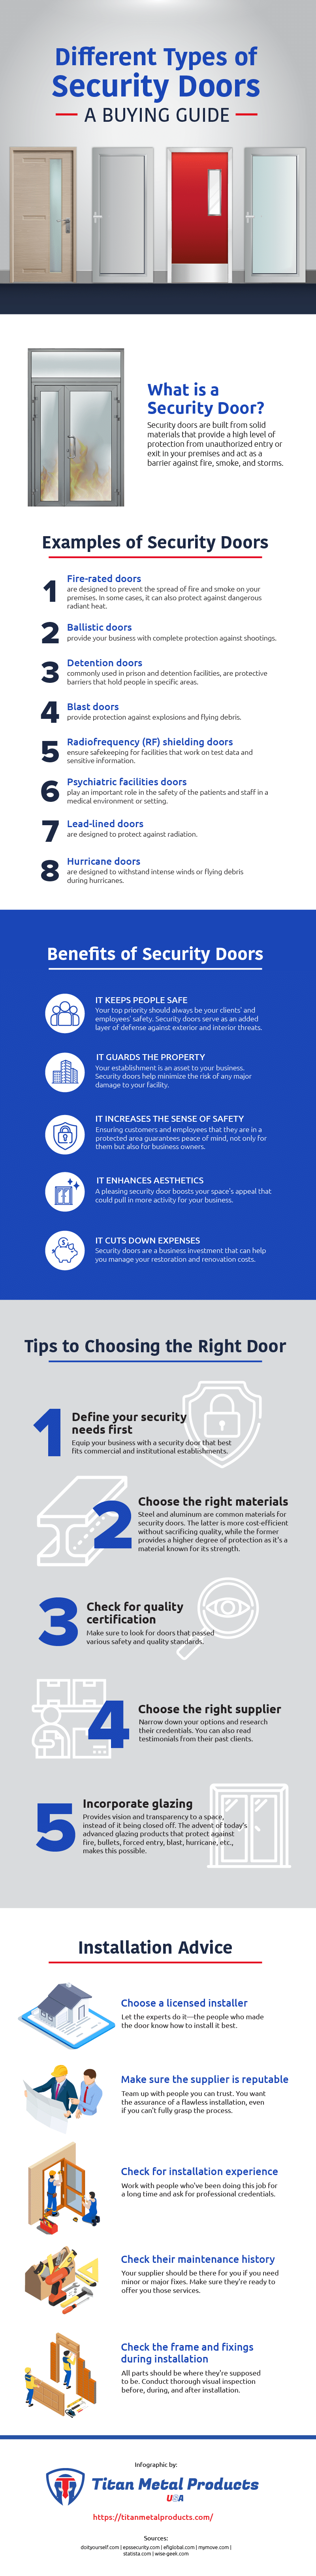 Different Types of Security Doors: A Buying Guide